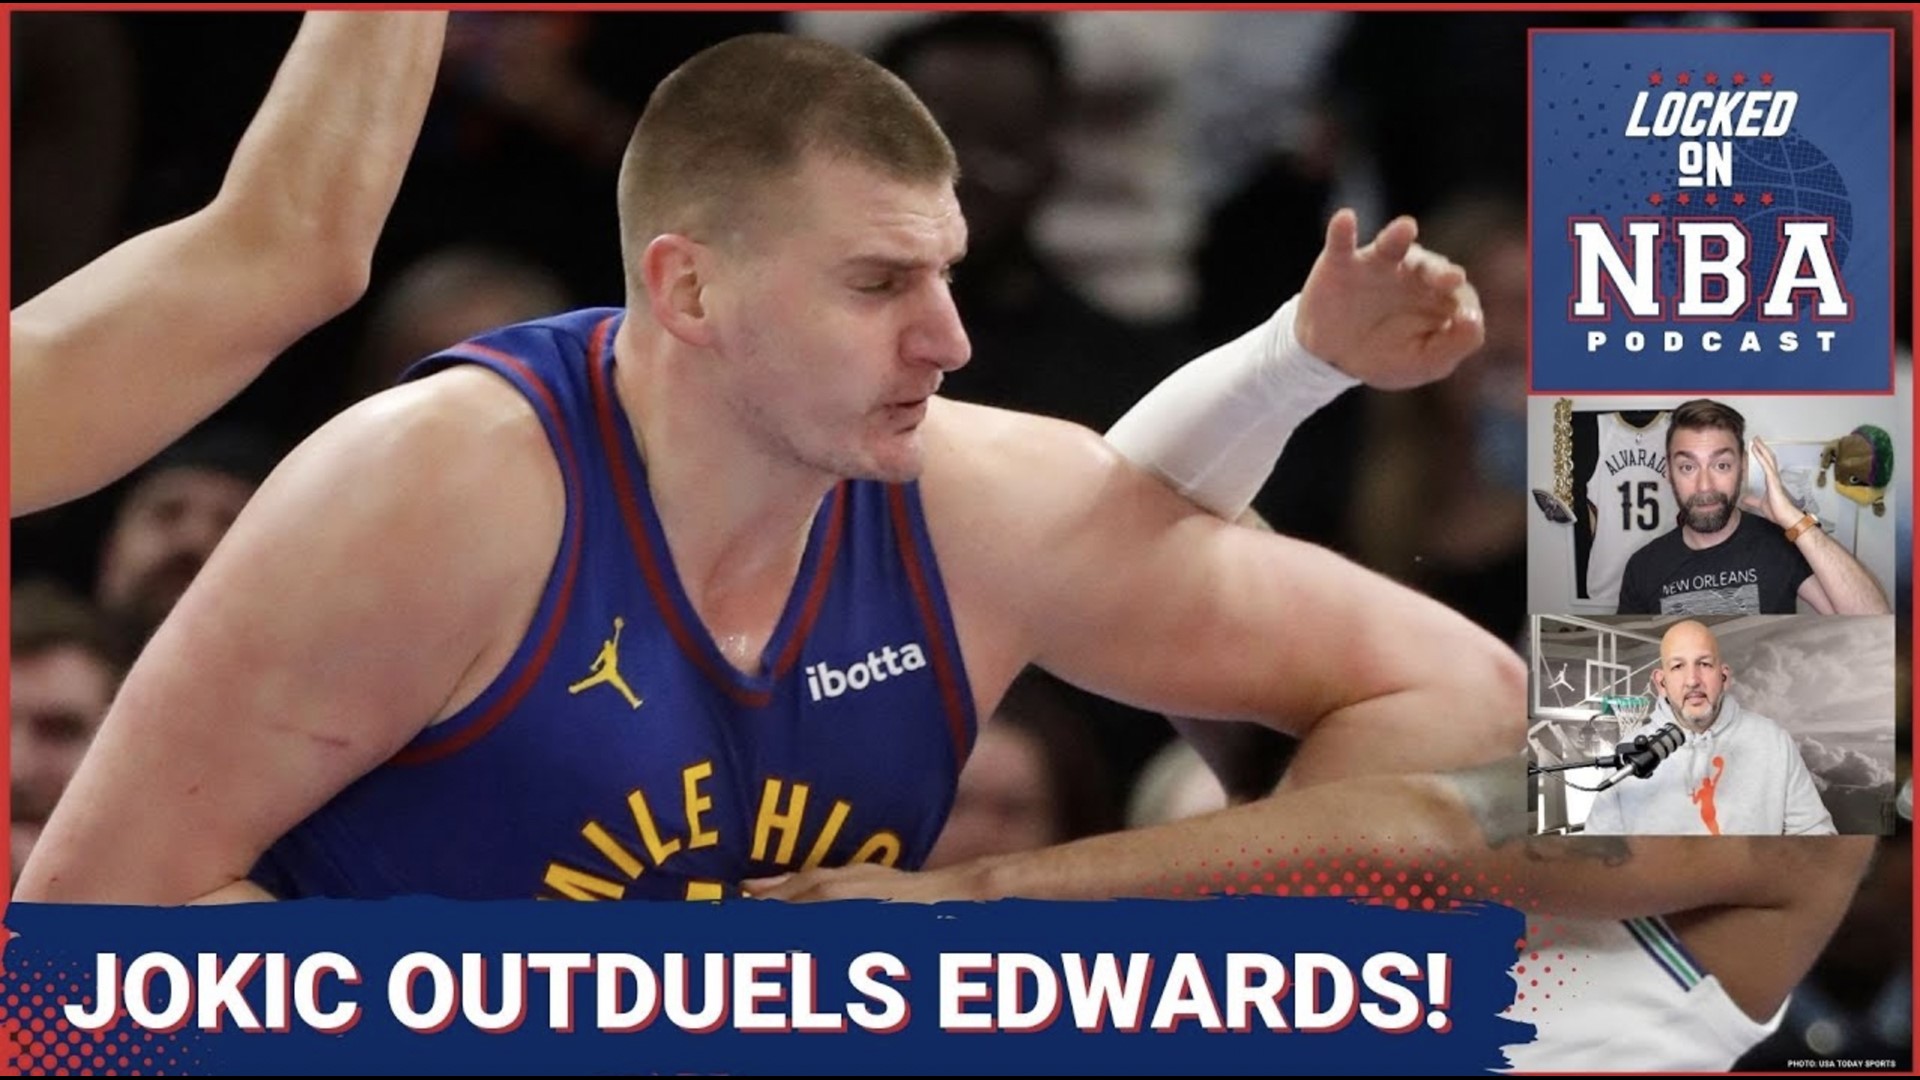 Nikola Jokić and Anthony Edwards faced off in a pivotal game for playoff seeding with Jokic coming out on top.